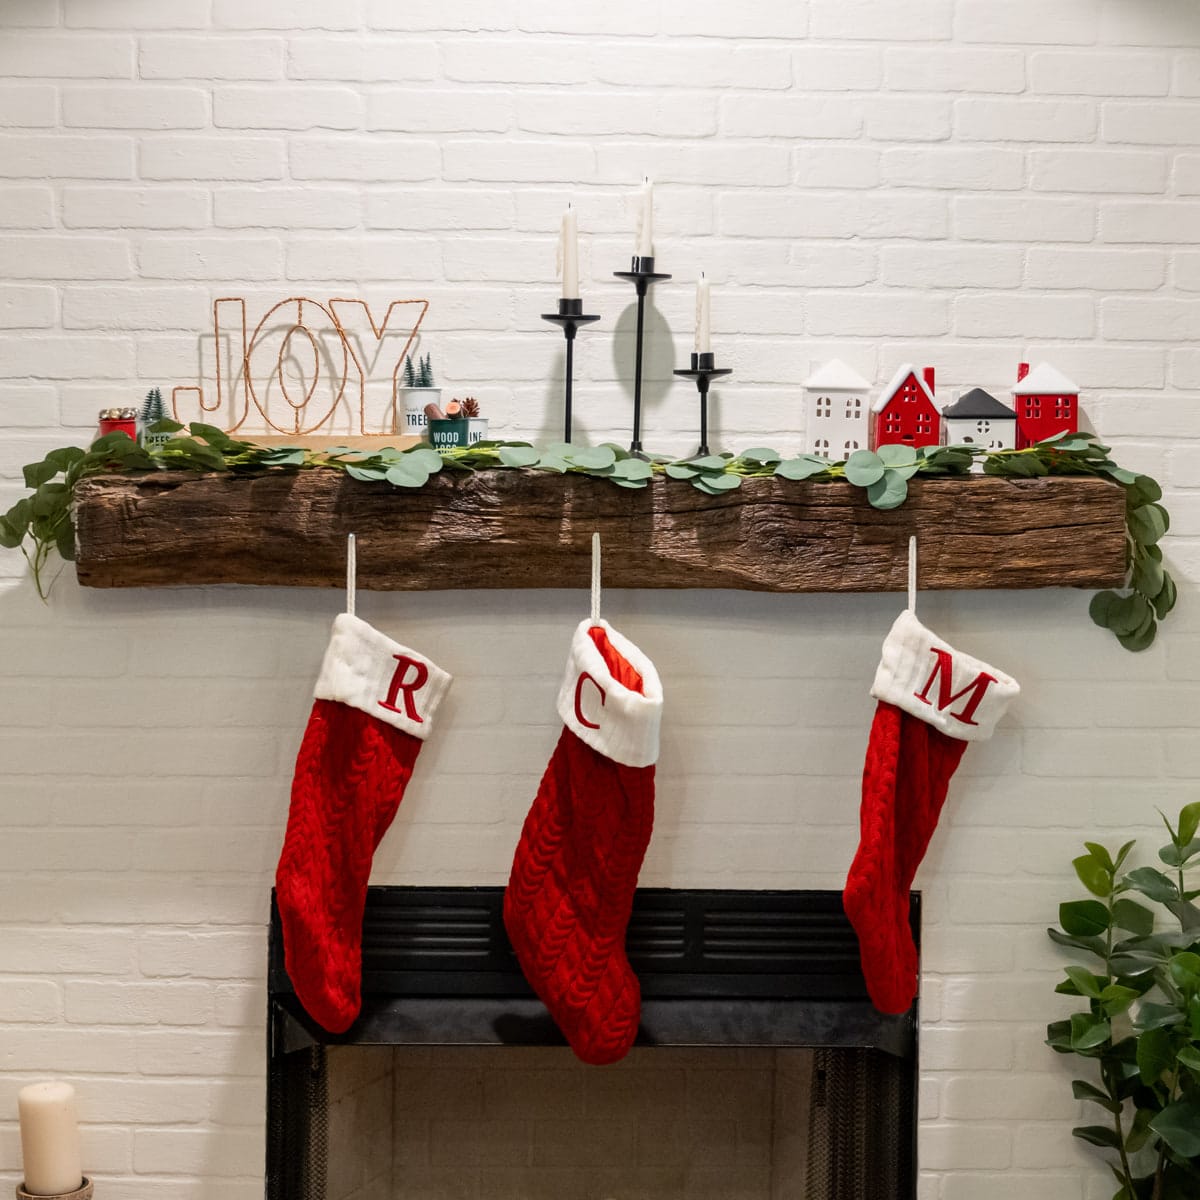 Fireplace mantle with Christmas stockings